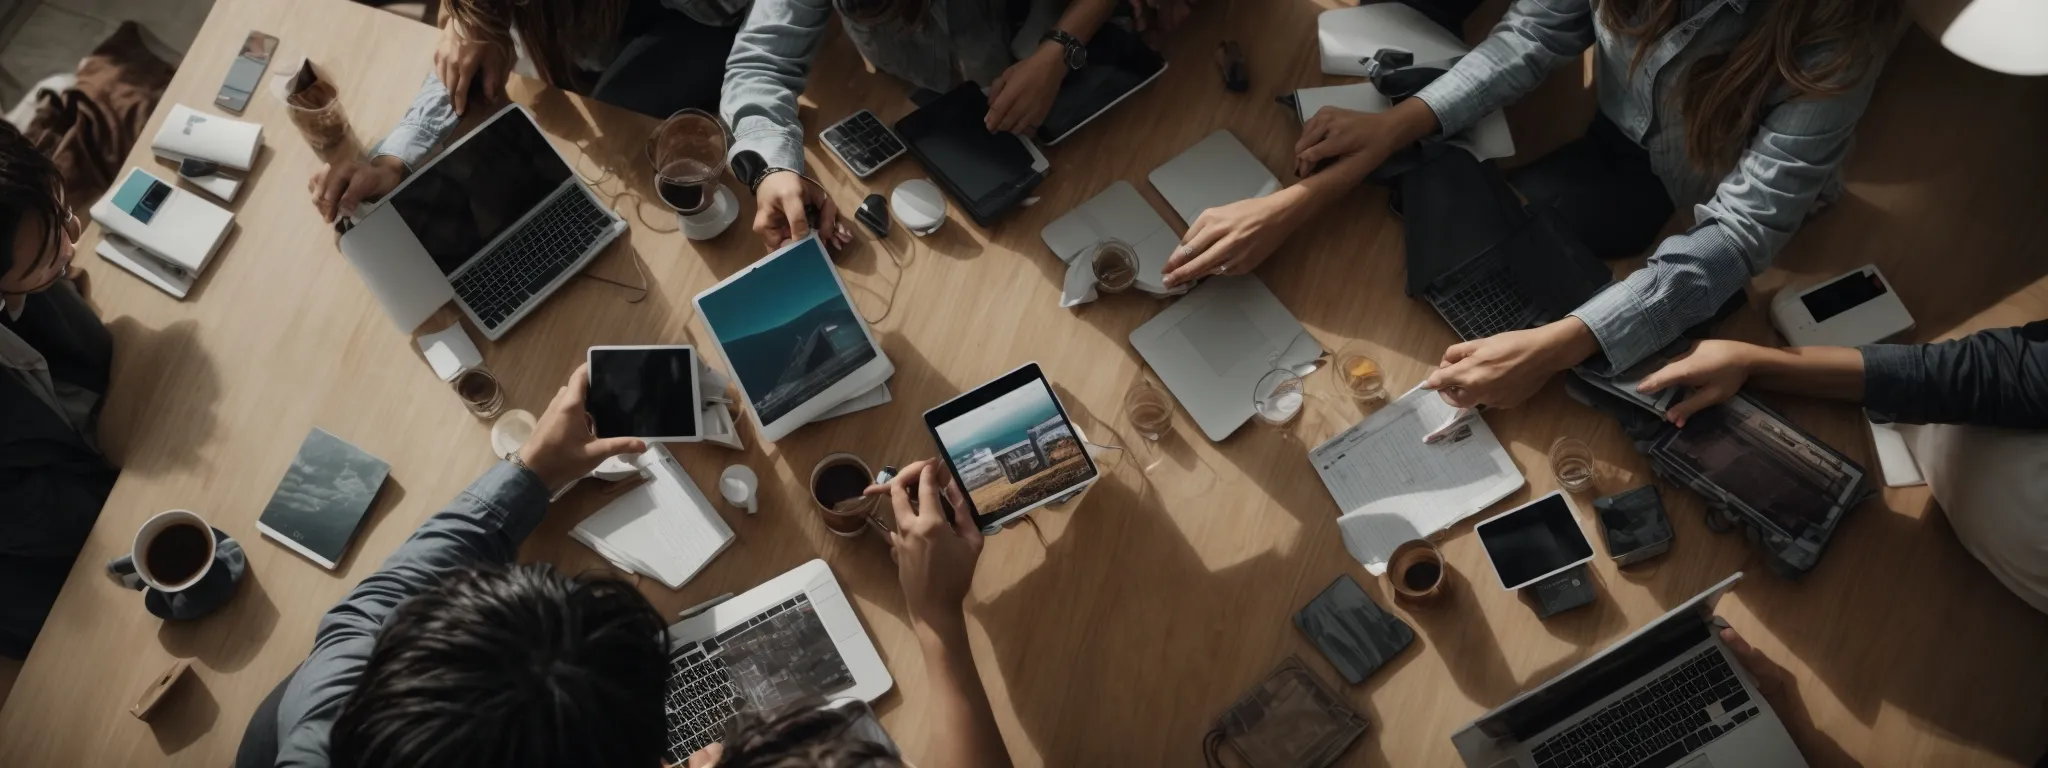 a team gathers around a large table, each member engrossed with different devices, symbolizing a coordinated multi-channel marketing strategy session.